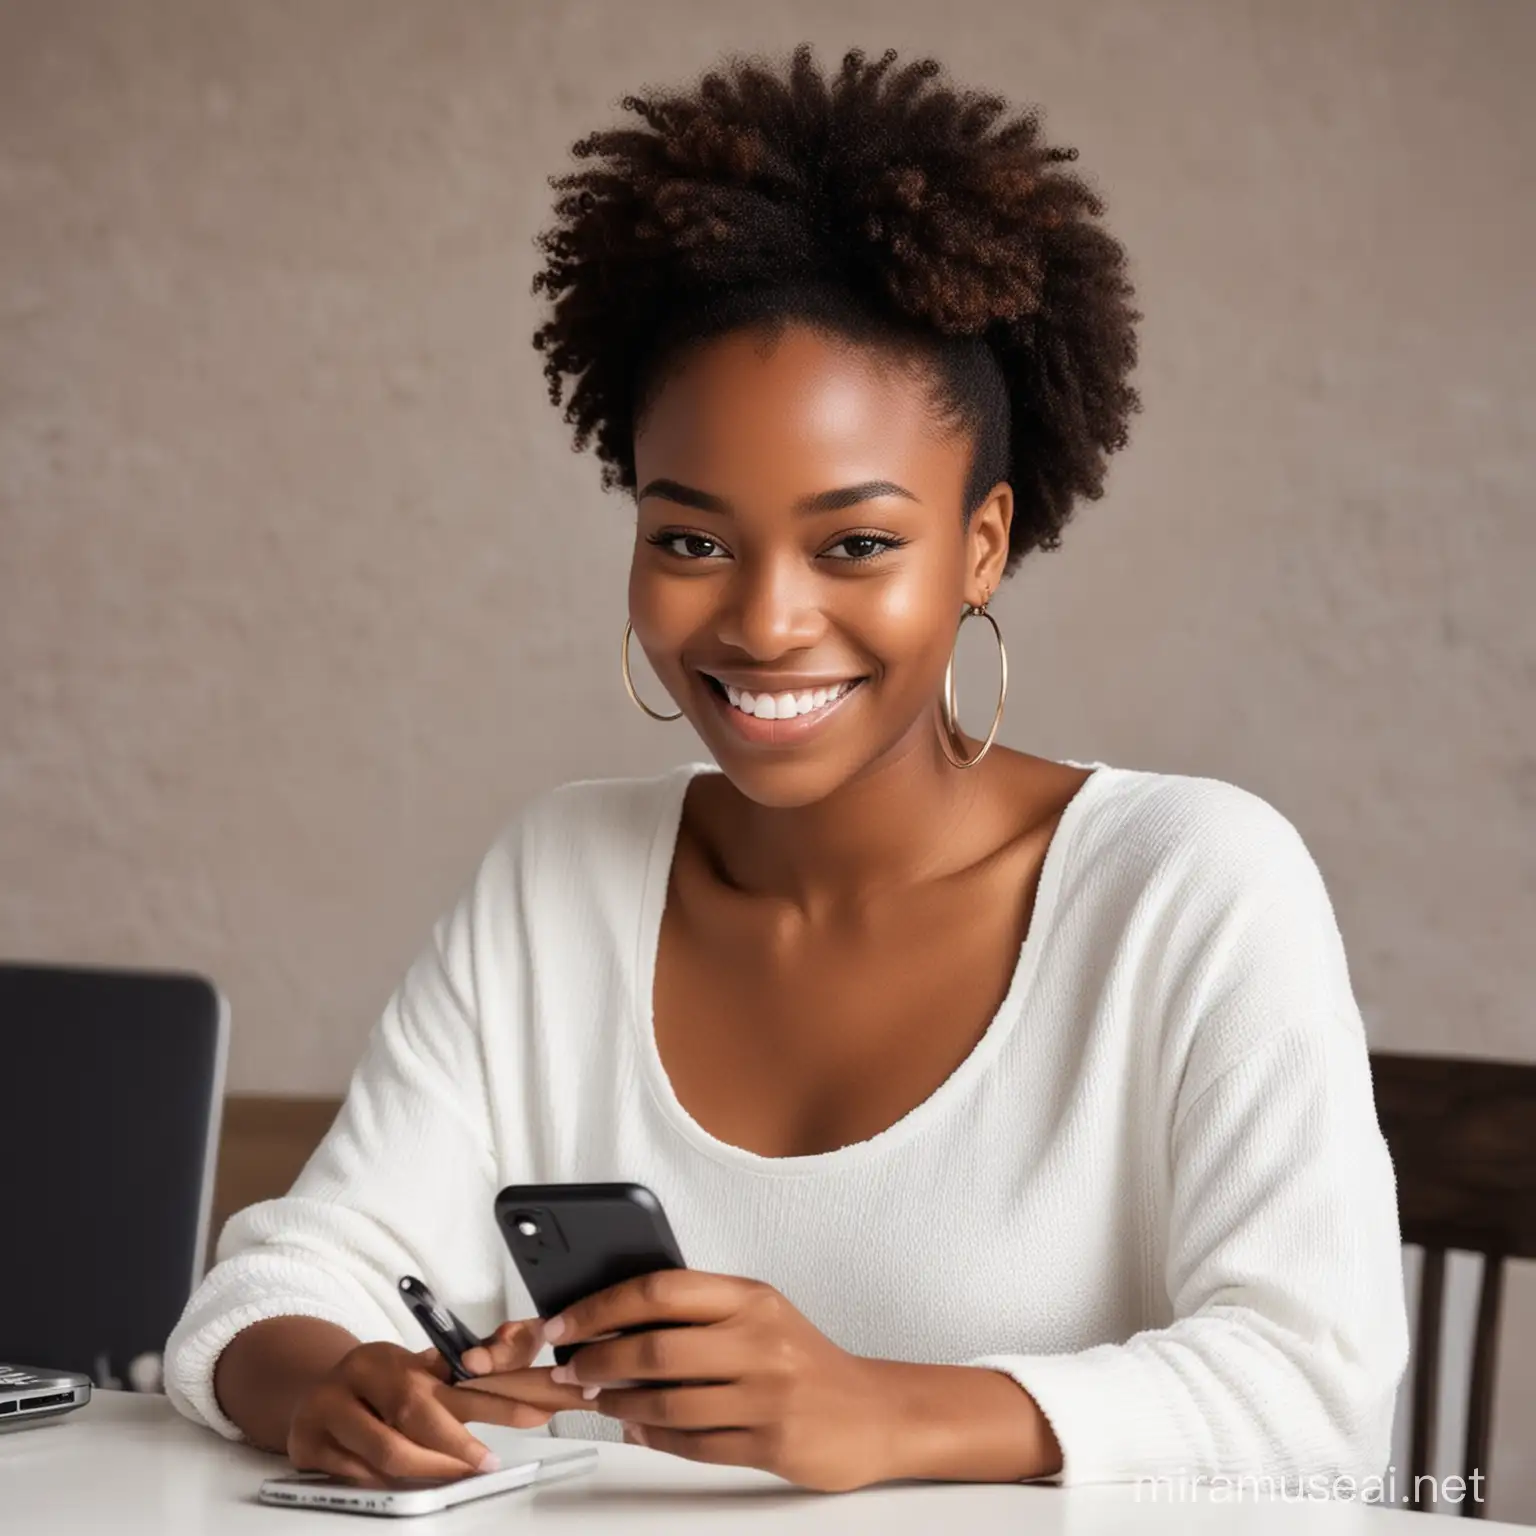 Smiling African Girl Typing on Phone with Radiant Joy